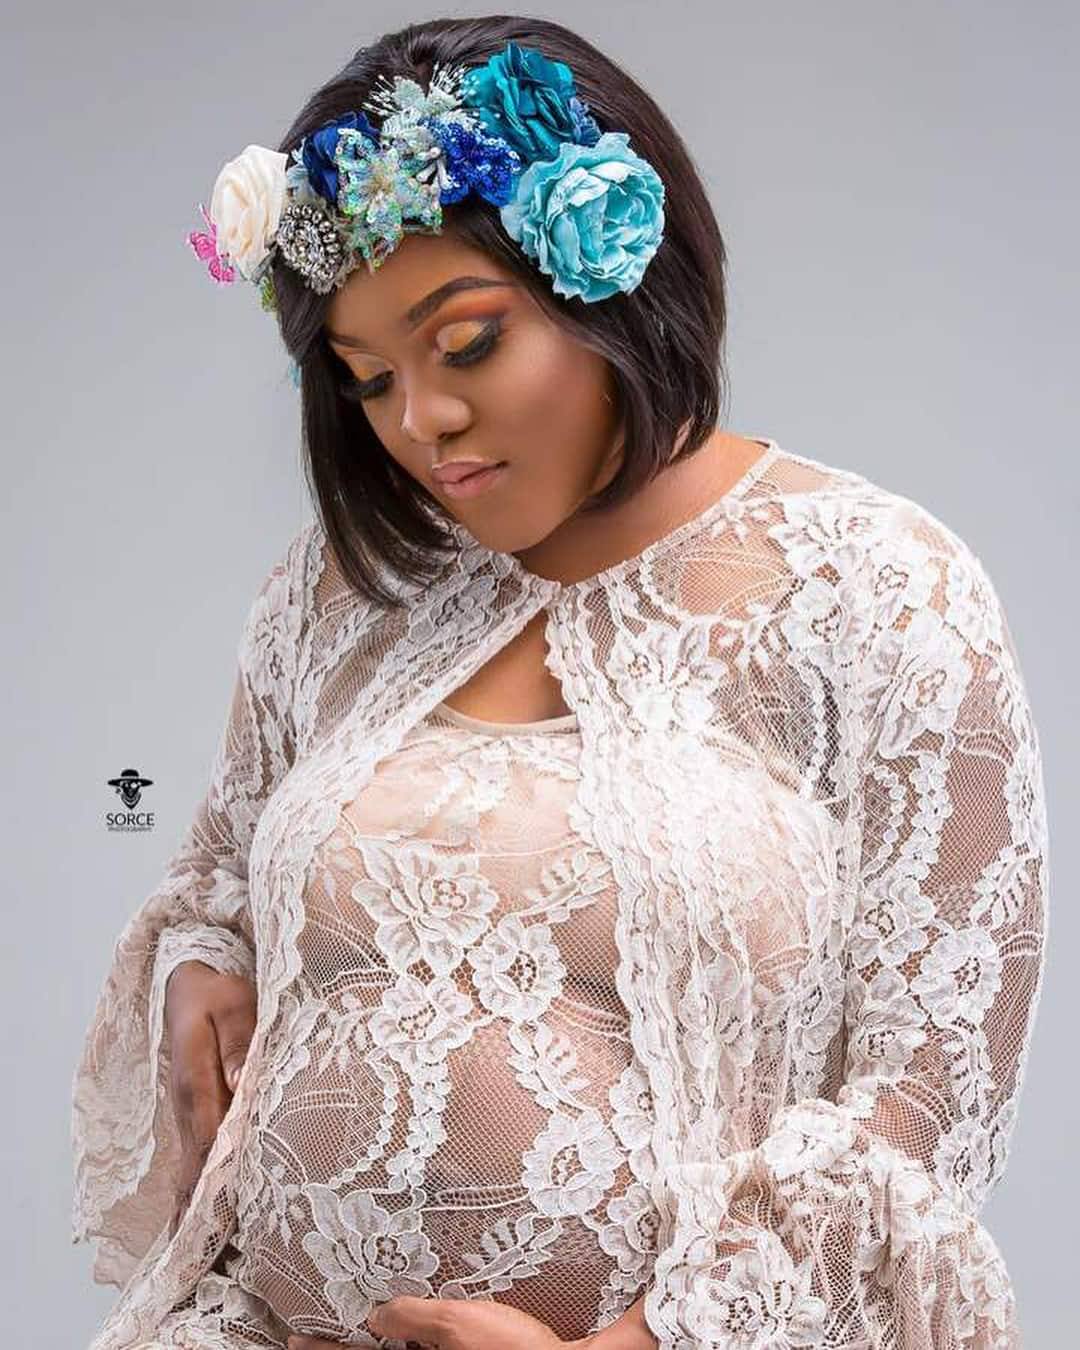 A Plus and Akosua Vee welcome their new born baby girl